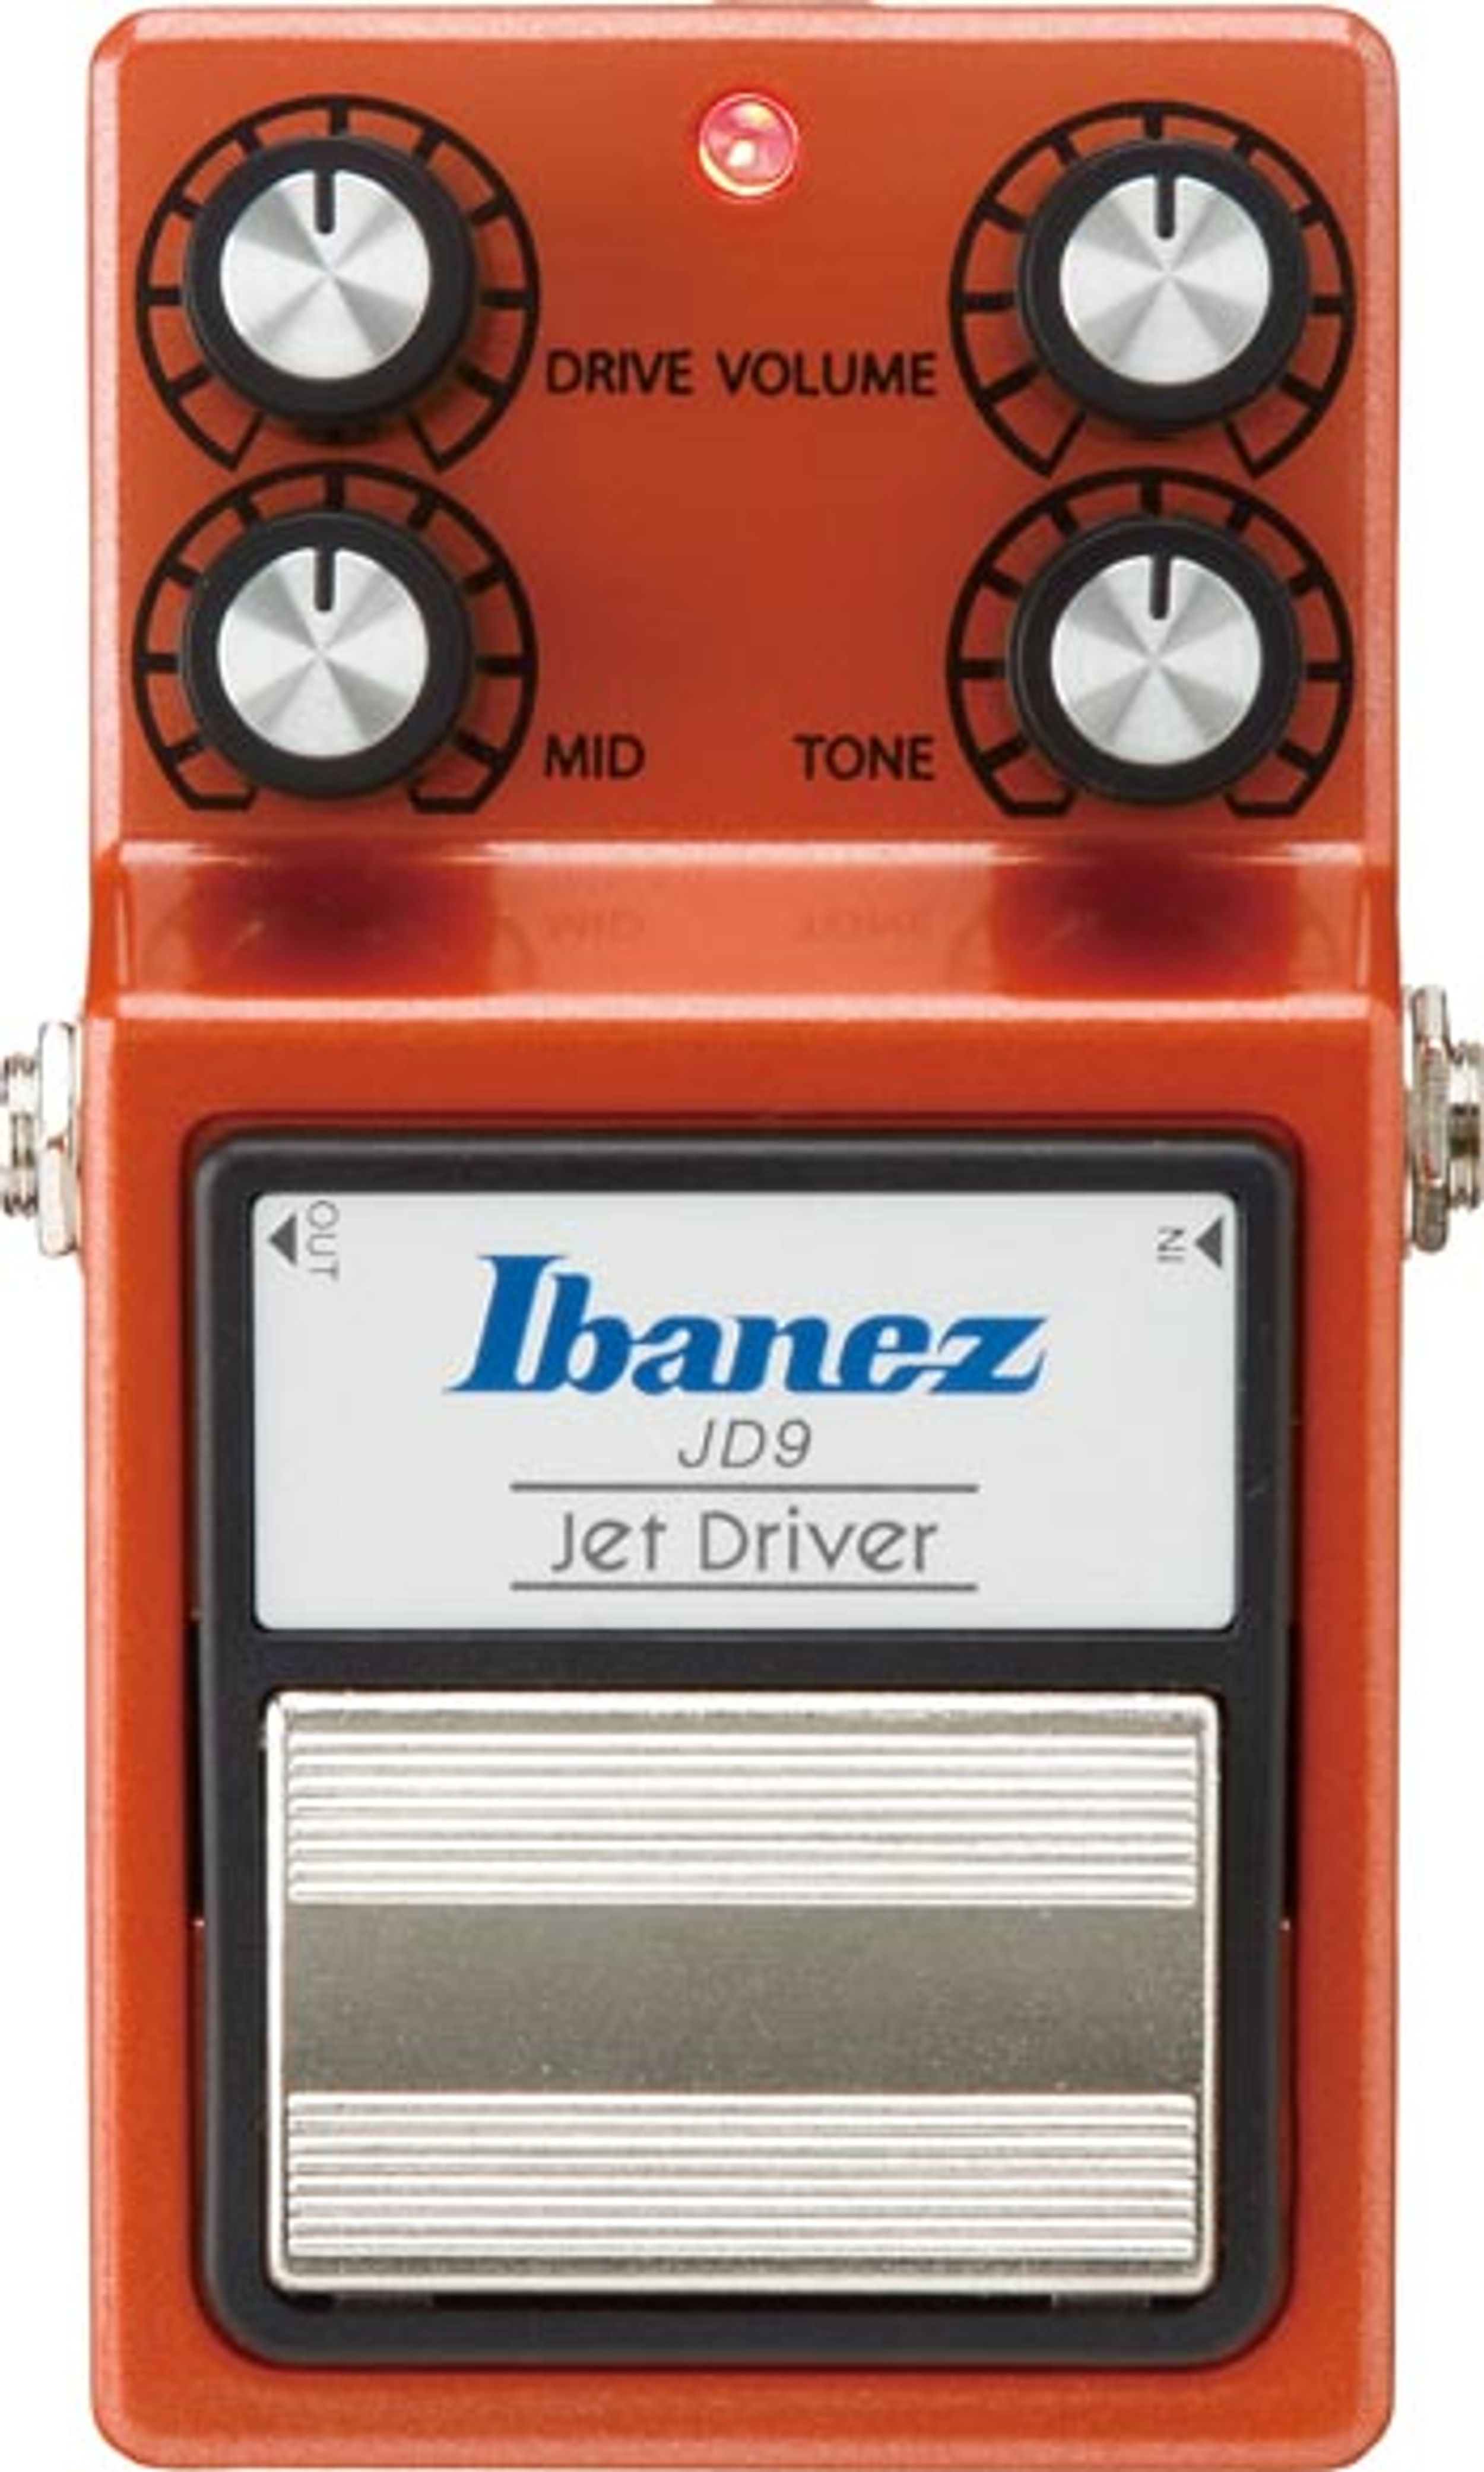 Ibanez JD9 Jet Driver Pedal Review